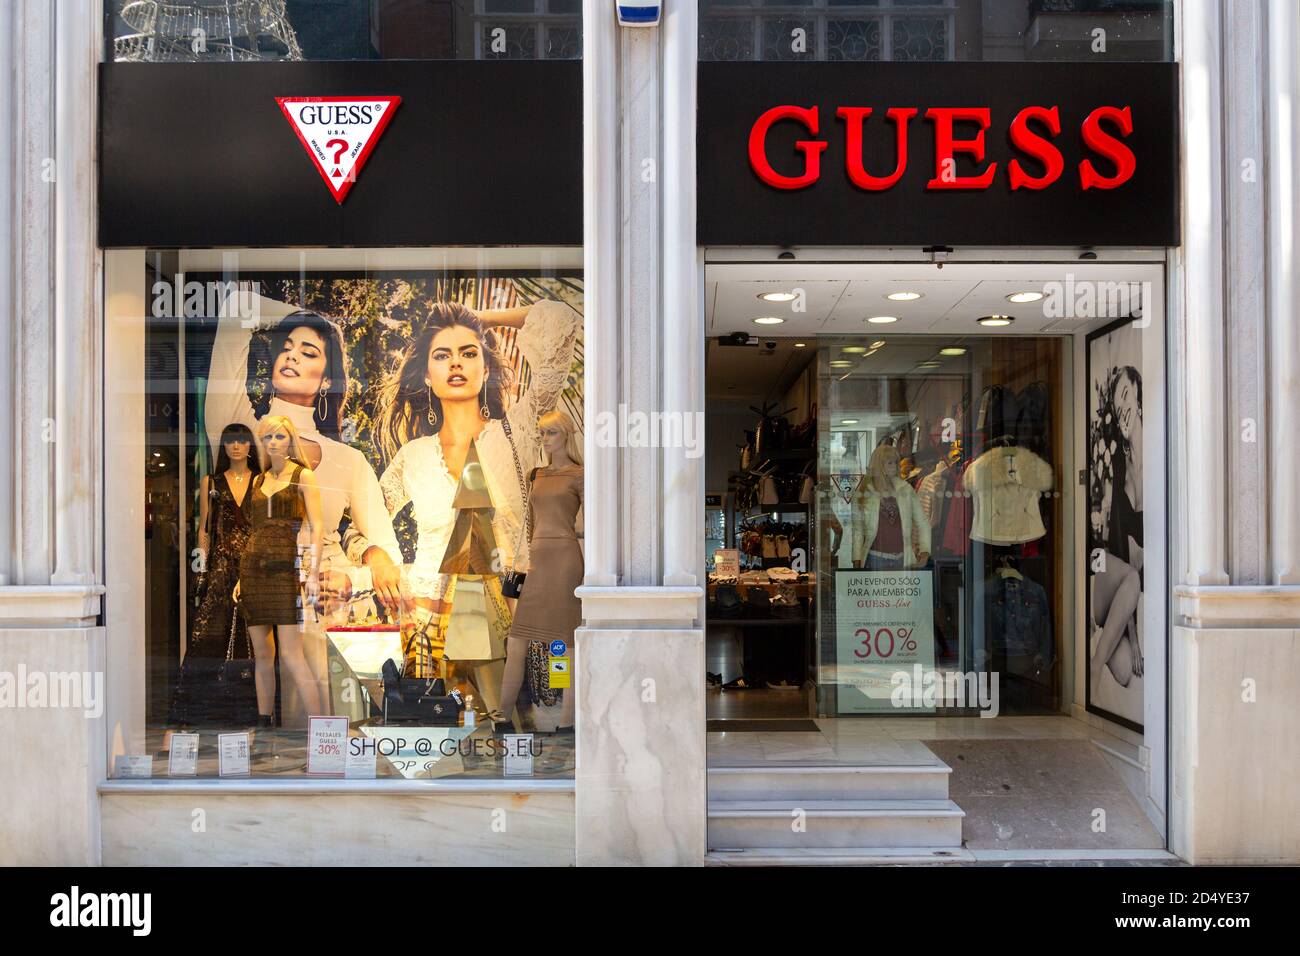 Guess By Guess Online Shop | estudioespositoymiguel.com.ar